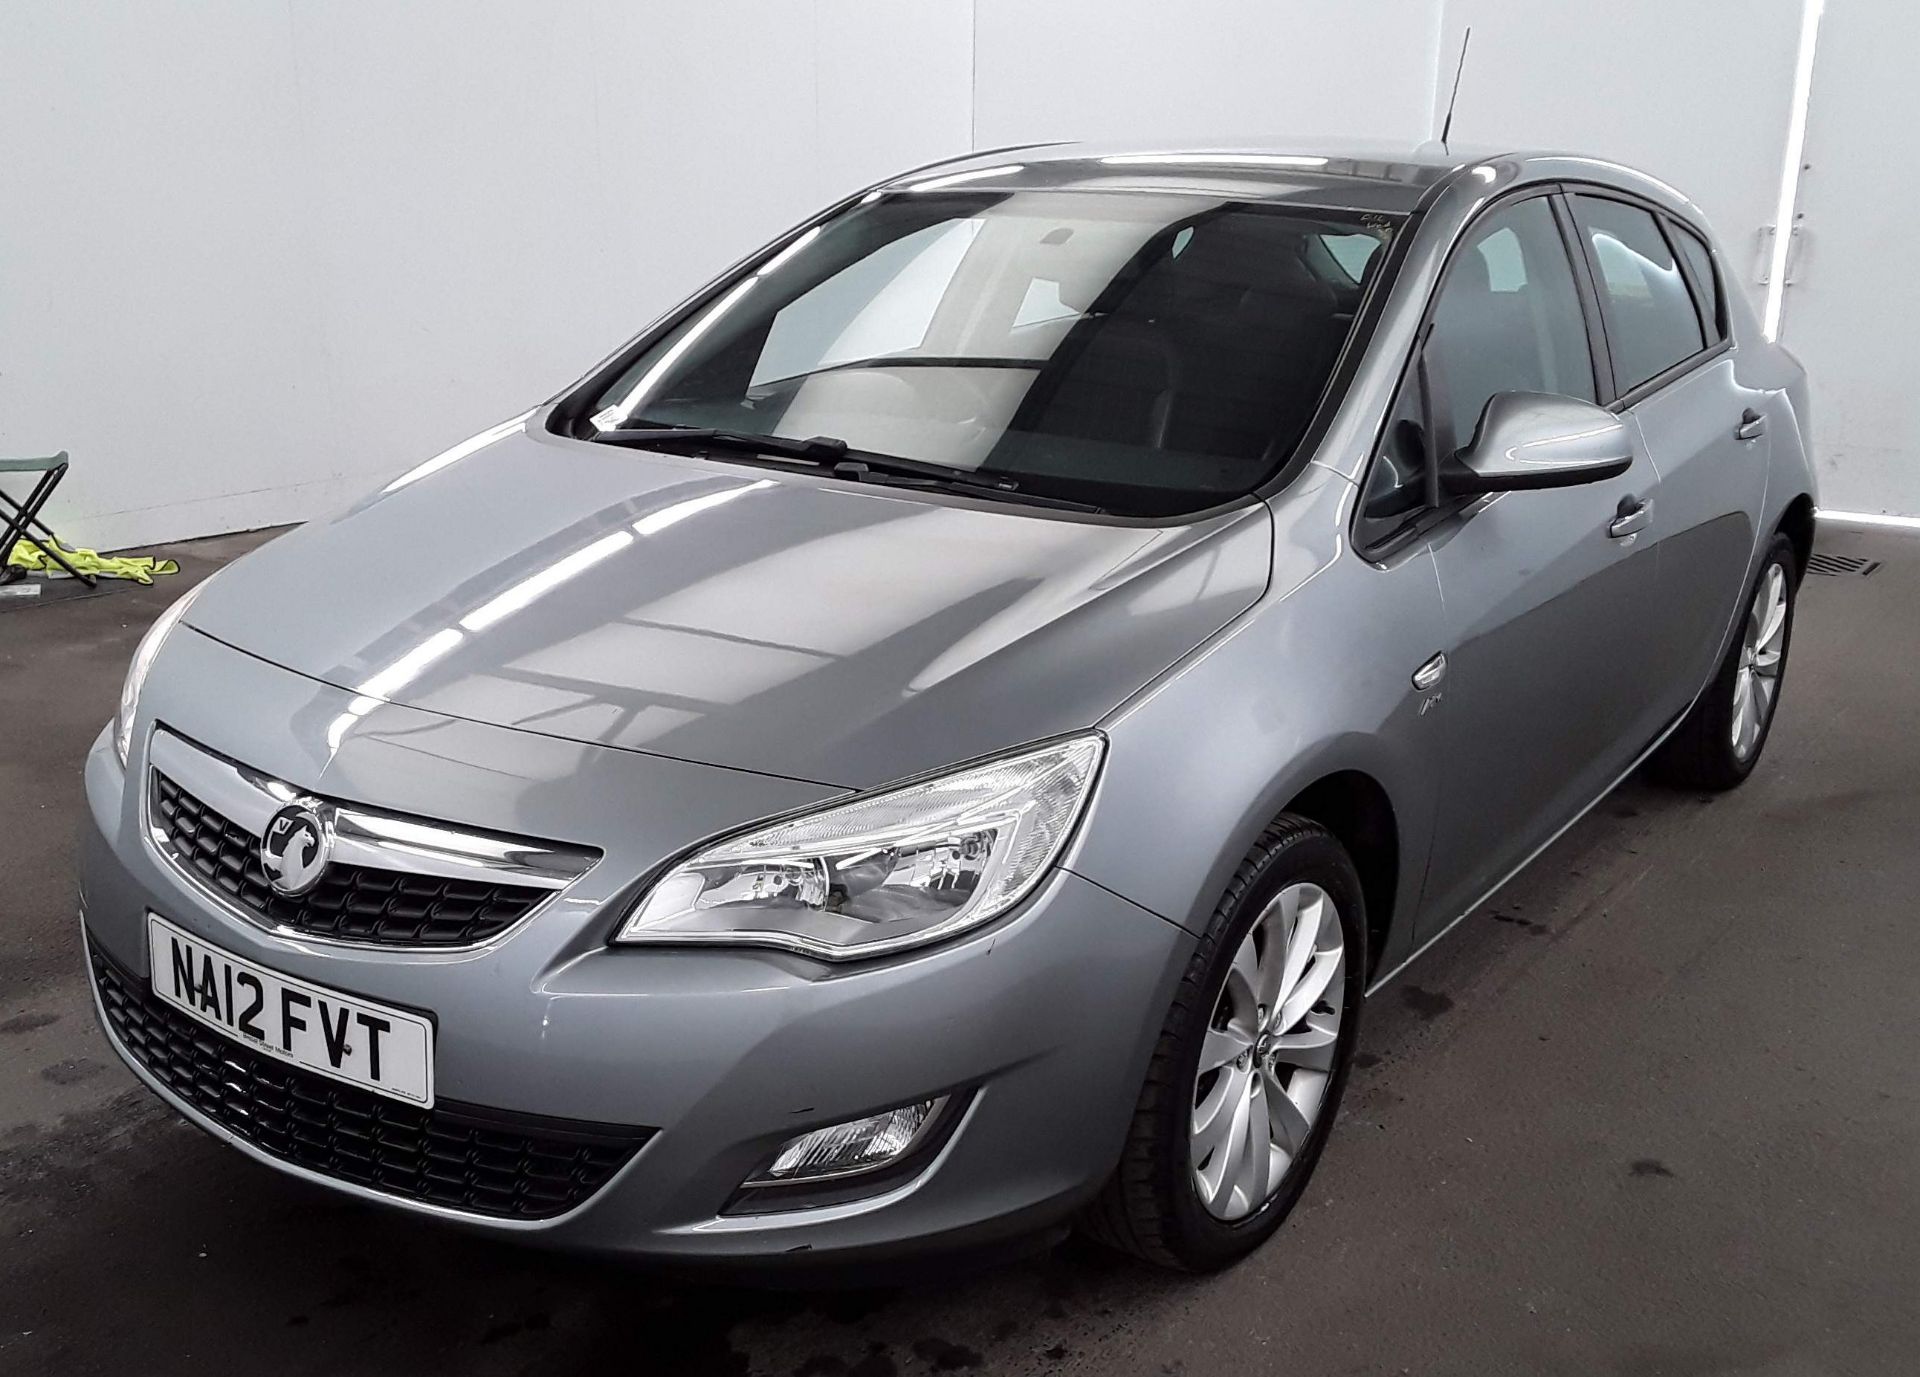 2012 Vauxhall Astra 1.4 Active 5 Door Hatchback - CL505 - NO VAT ON THE HAMMER - Location: Corby, - Image 2 of 11